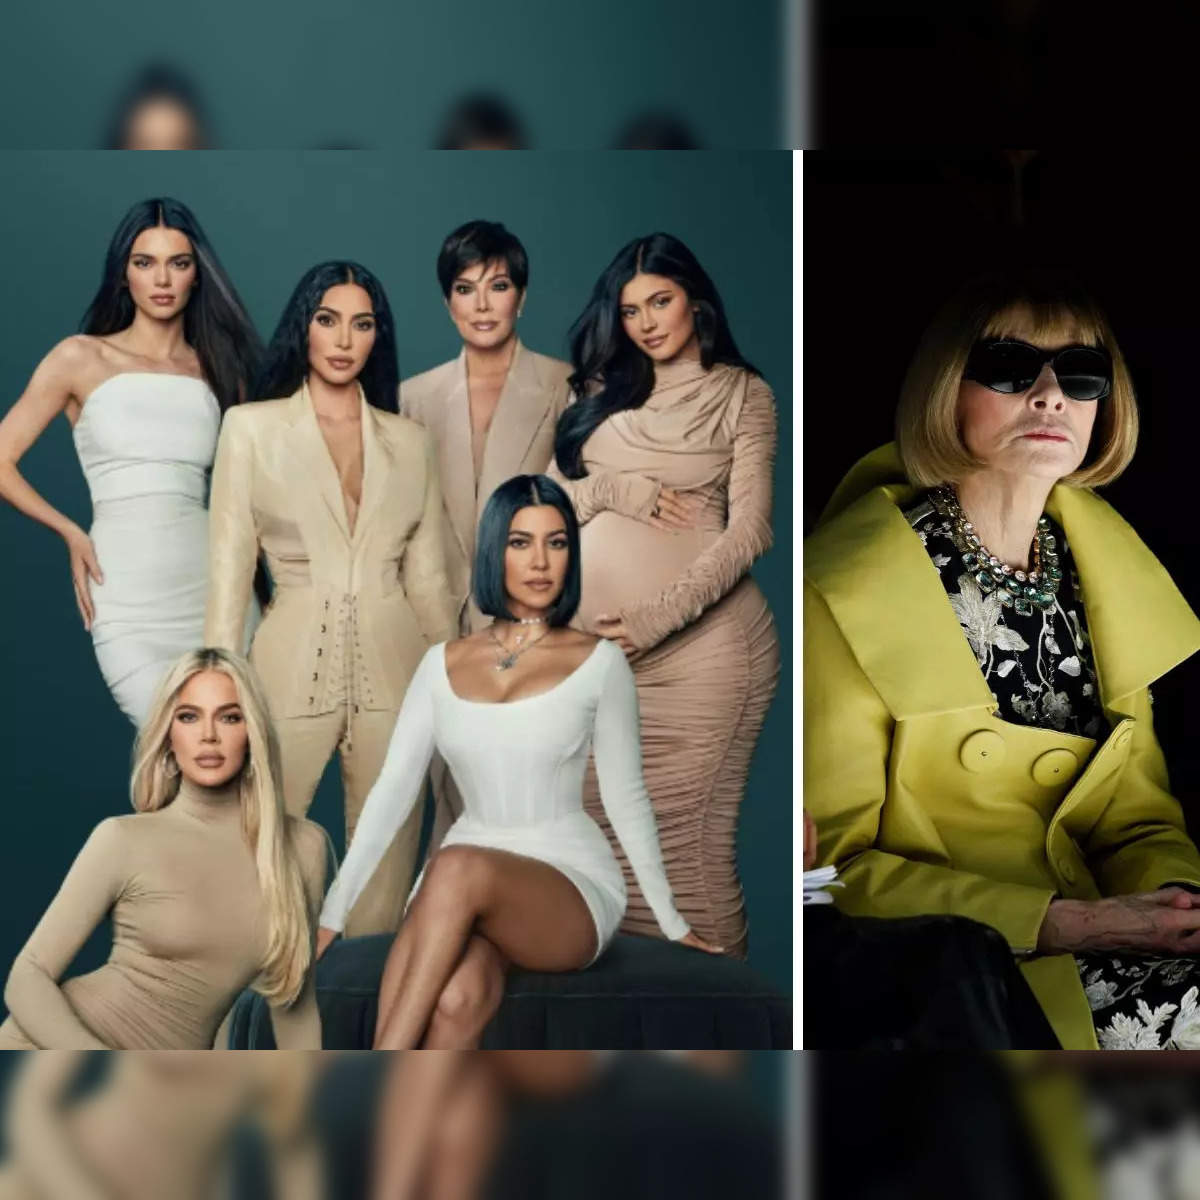 They can sell anything': how the Kardashians changed fashion, Fashion  industry